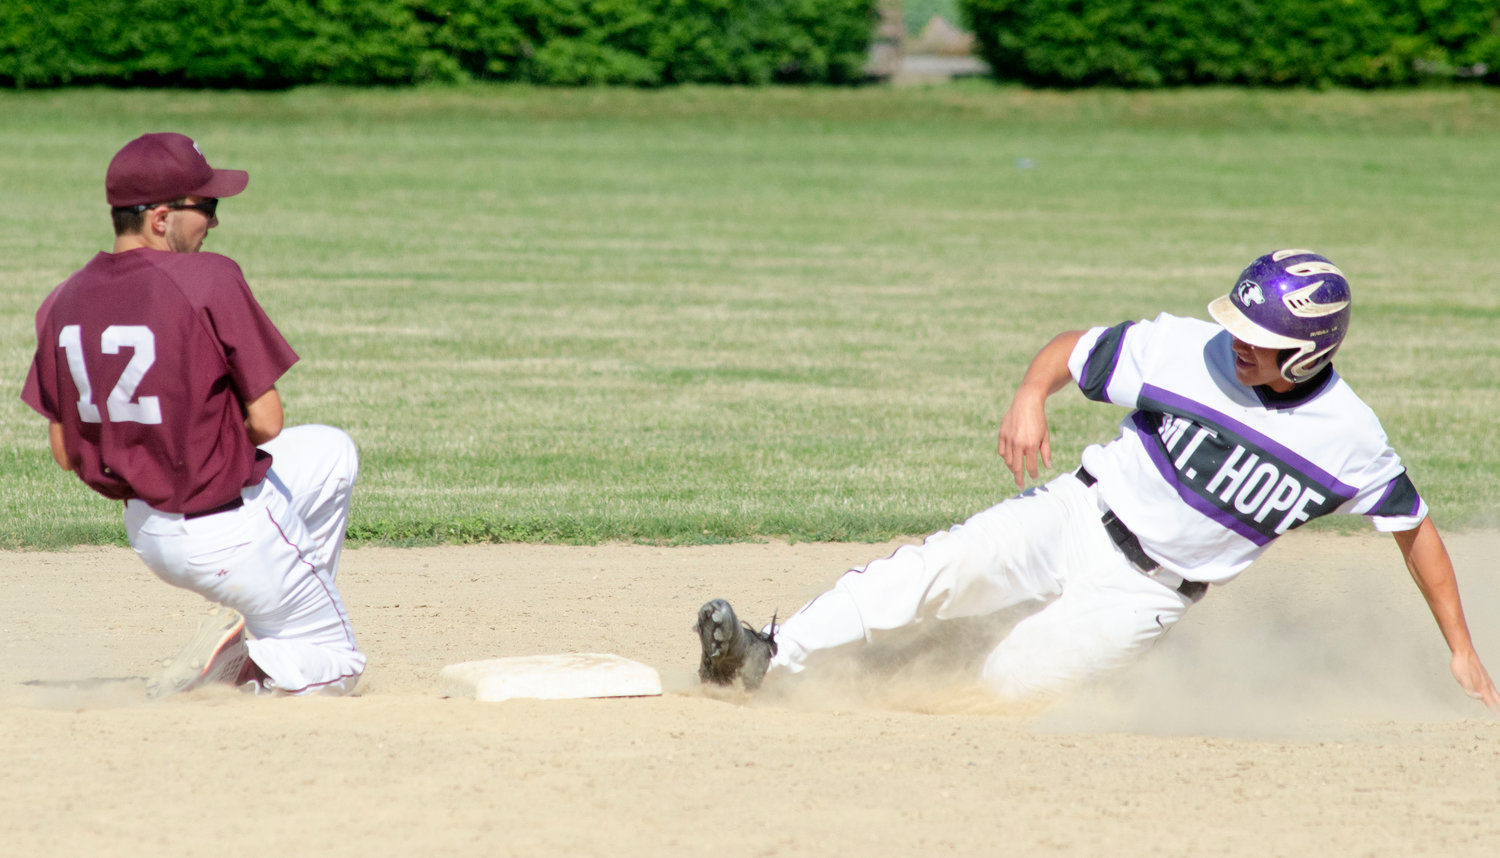 Shortstop Jameson Peckham corals the throw while Huskies Cam Connor steals second base.